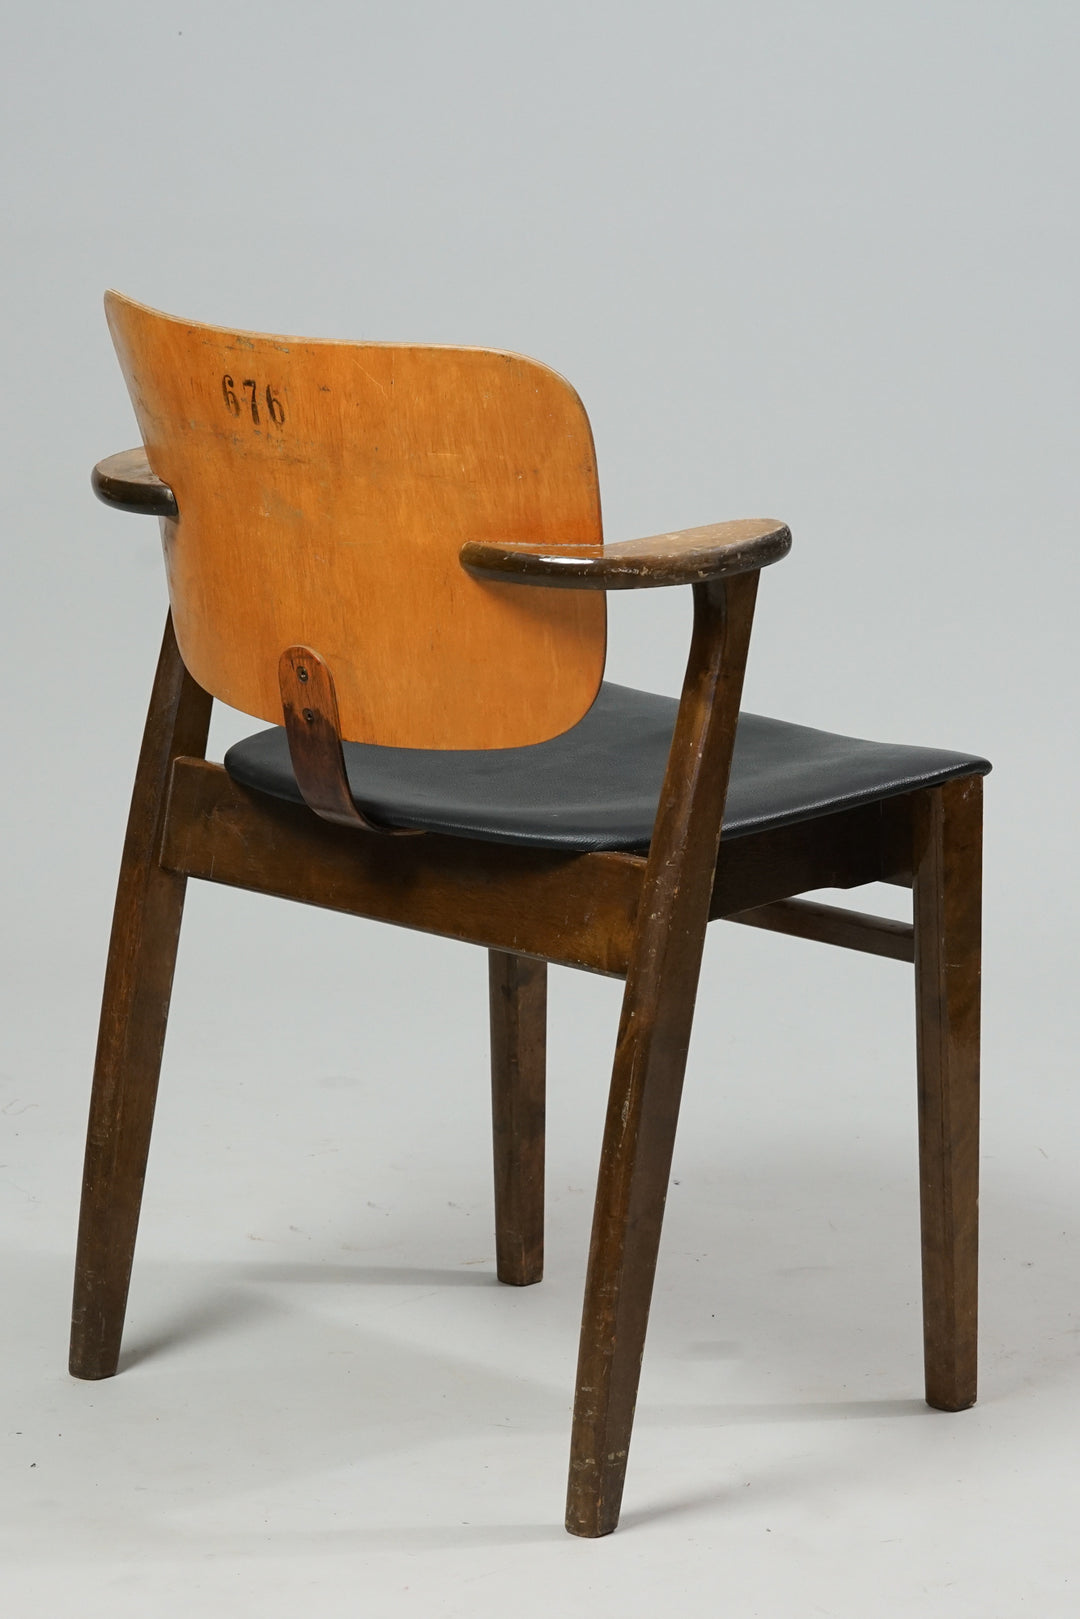 Birch frame chair with a leather seat. The legs and armrests of the chair are dark in color.